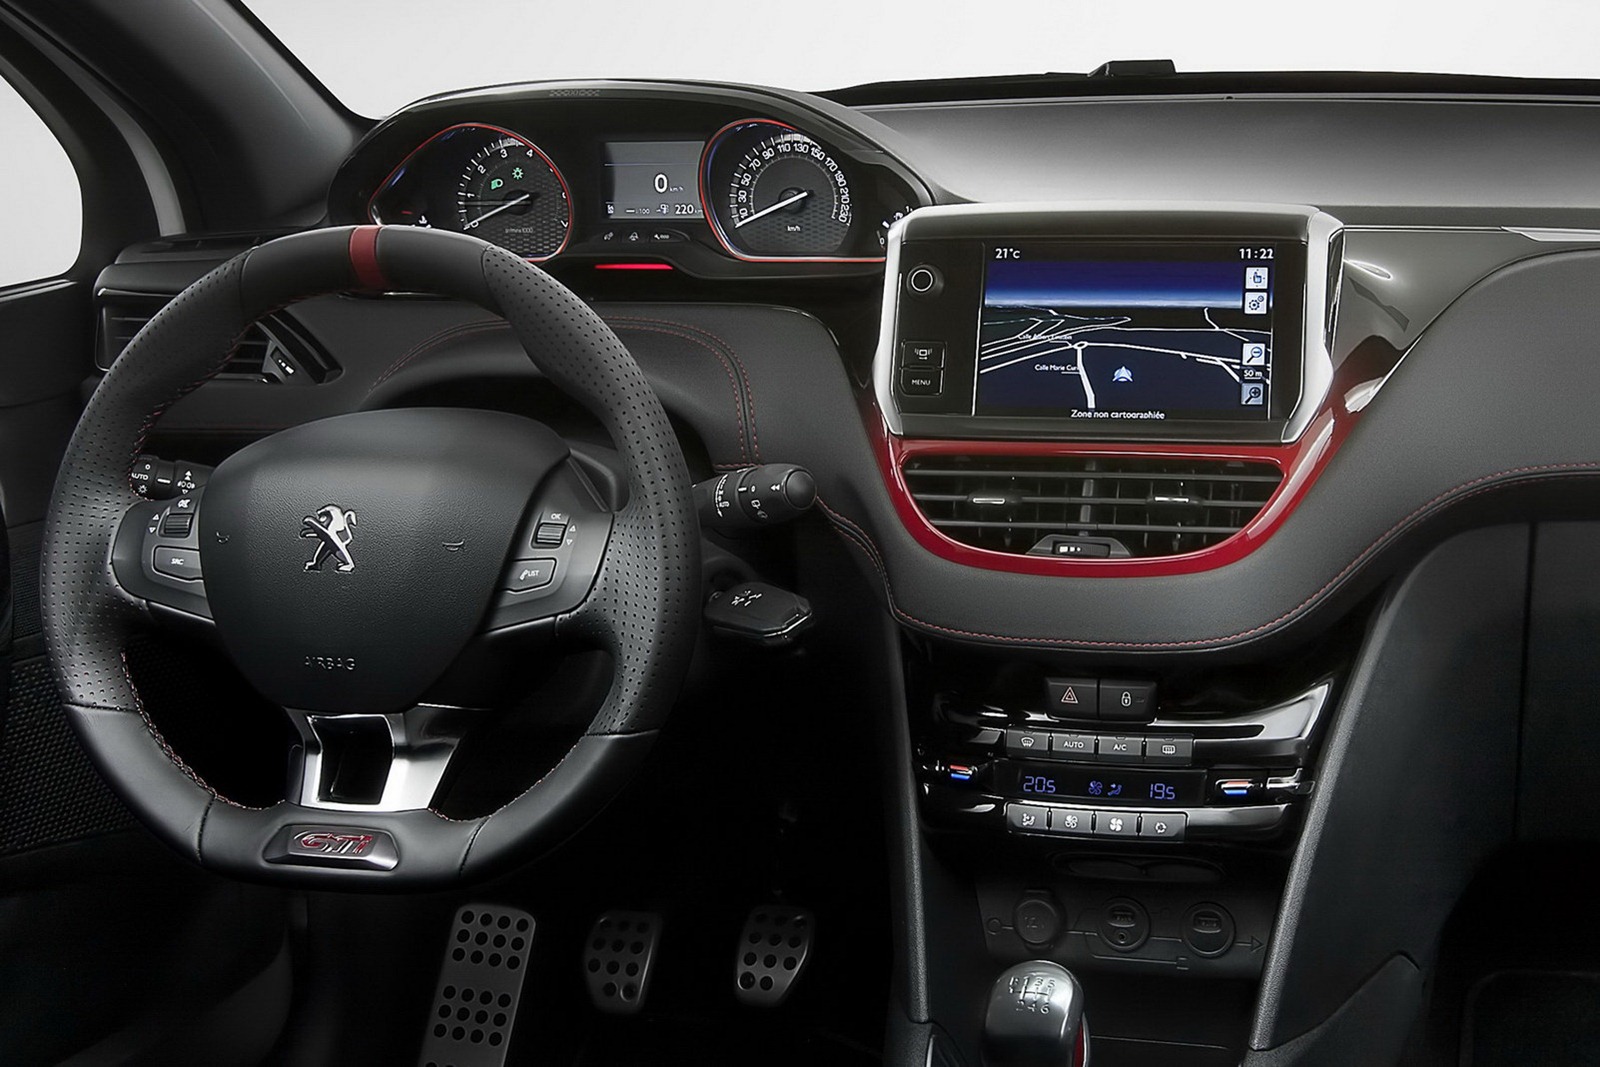 Peugeot Cars News 2013 208 GTi unveiled